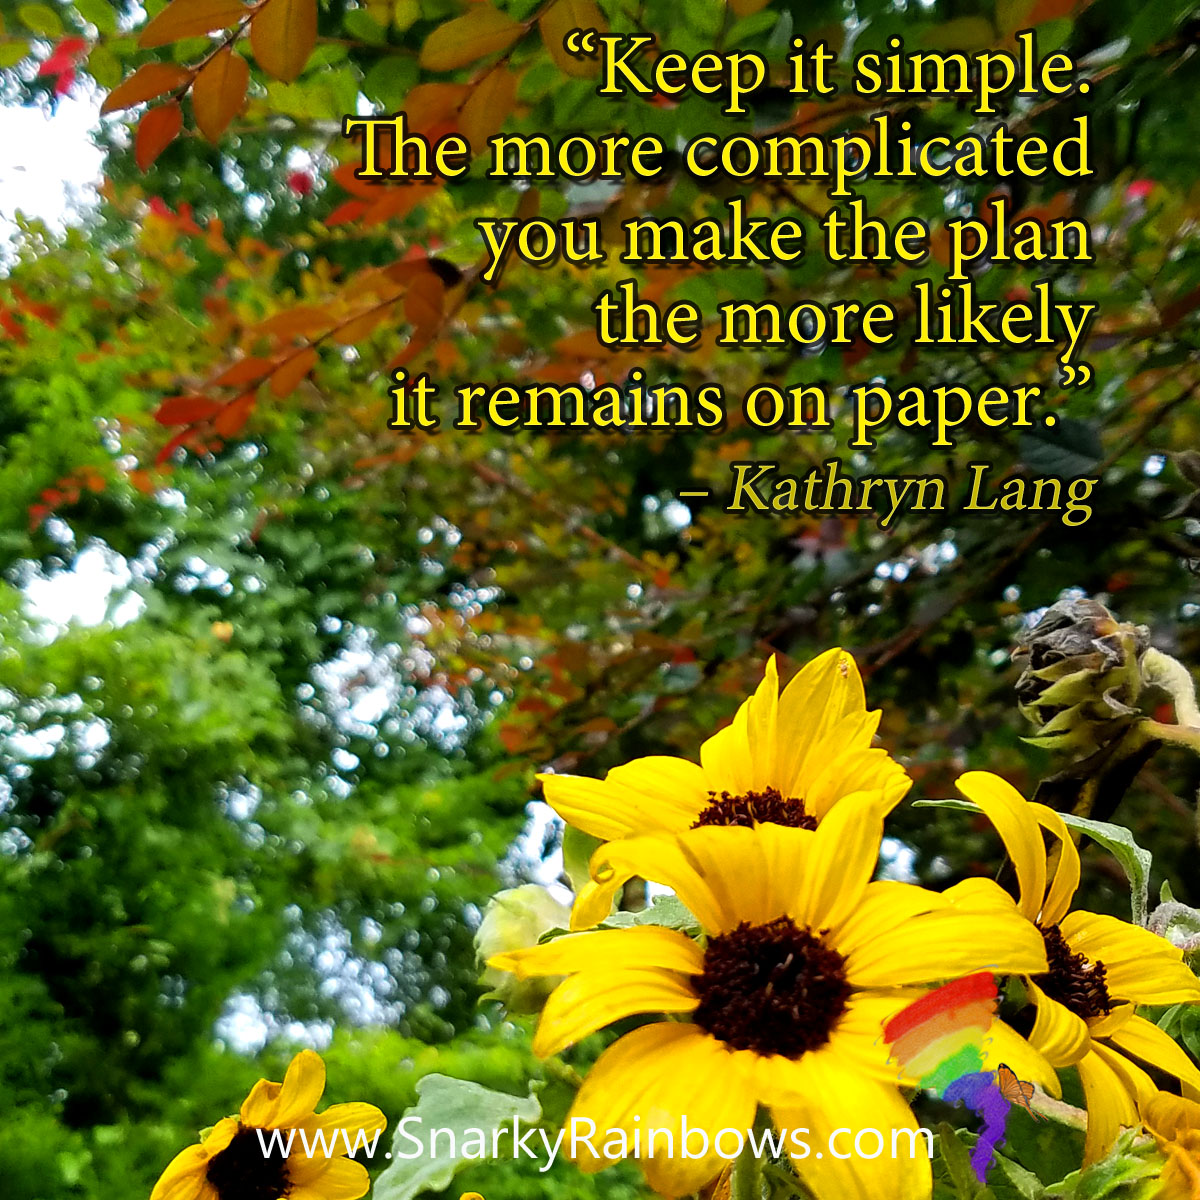 #quoteoftheDay - keep it simple to get it done